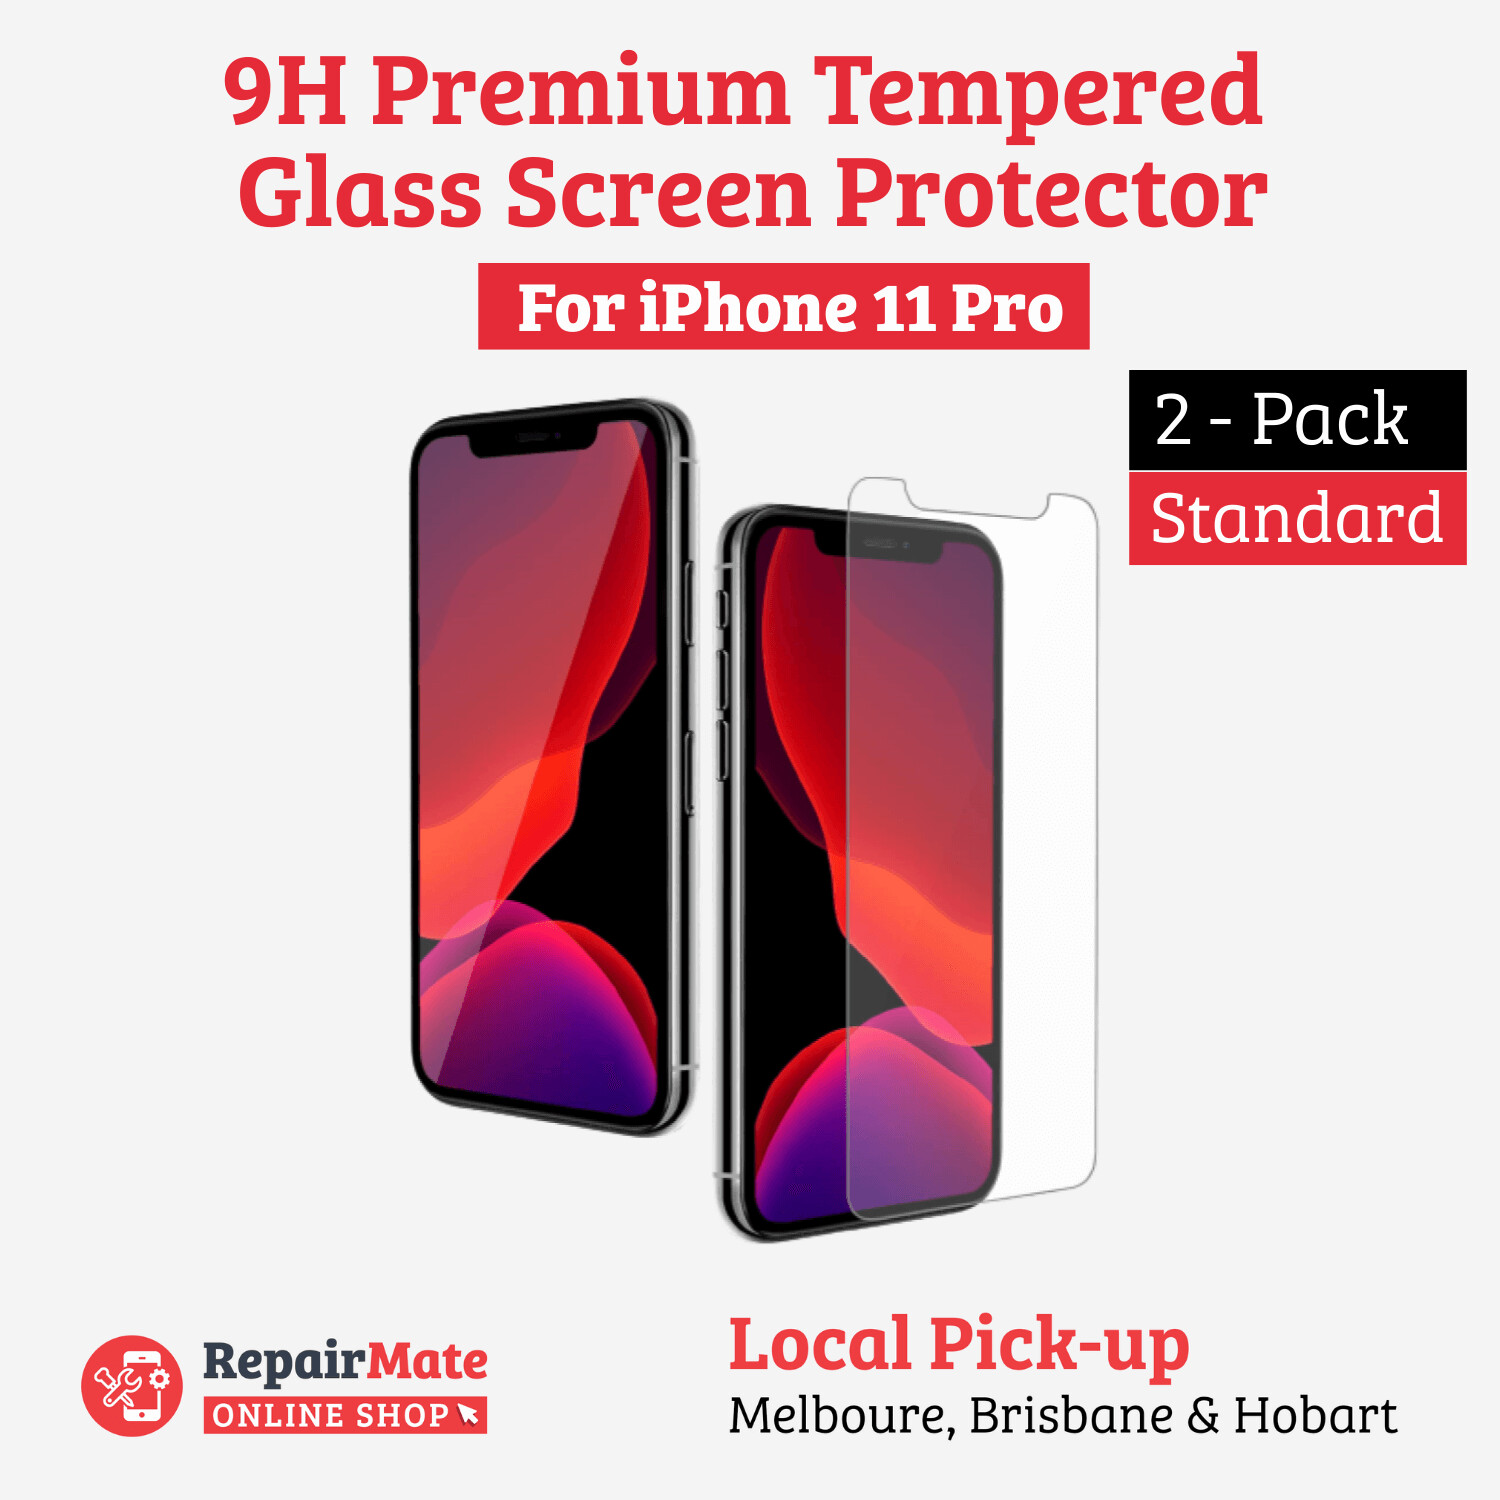 iPhone 11 Pro 9H Premium Tempered Glass Screen Protector [2 Pack]